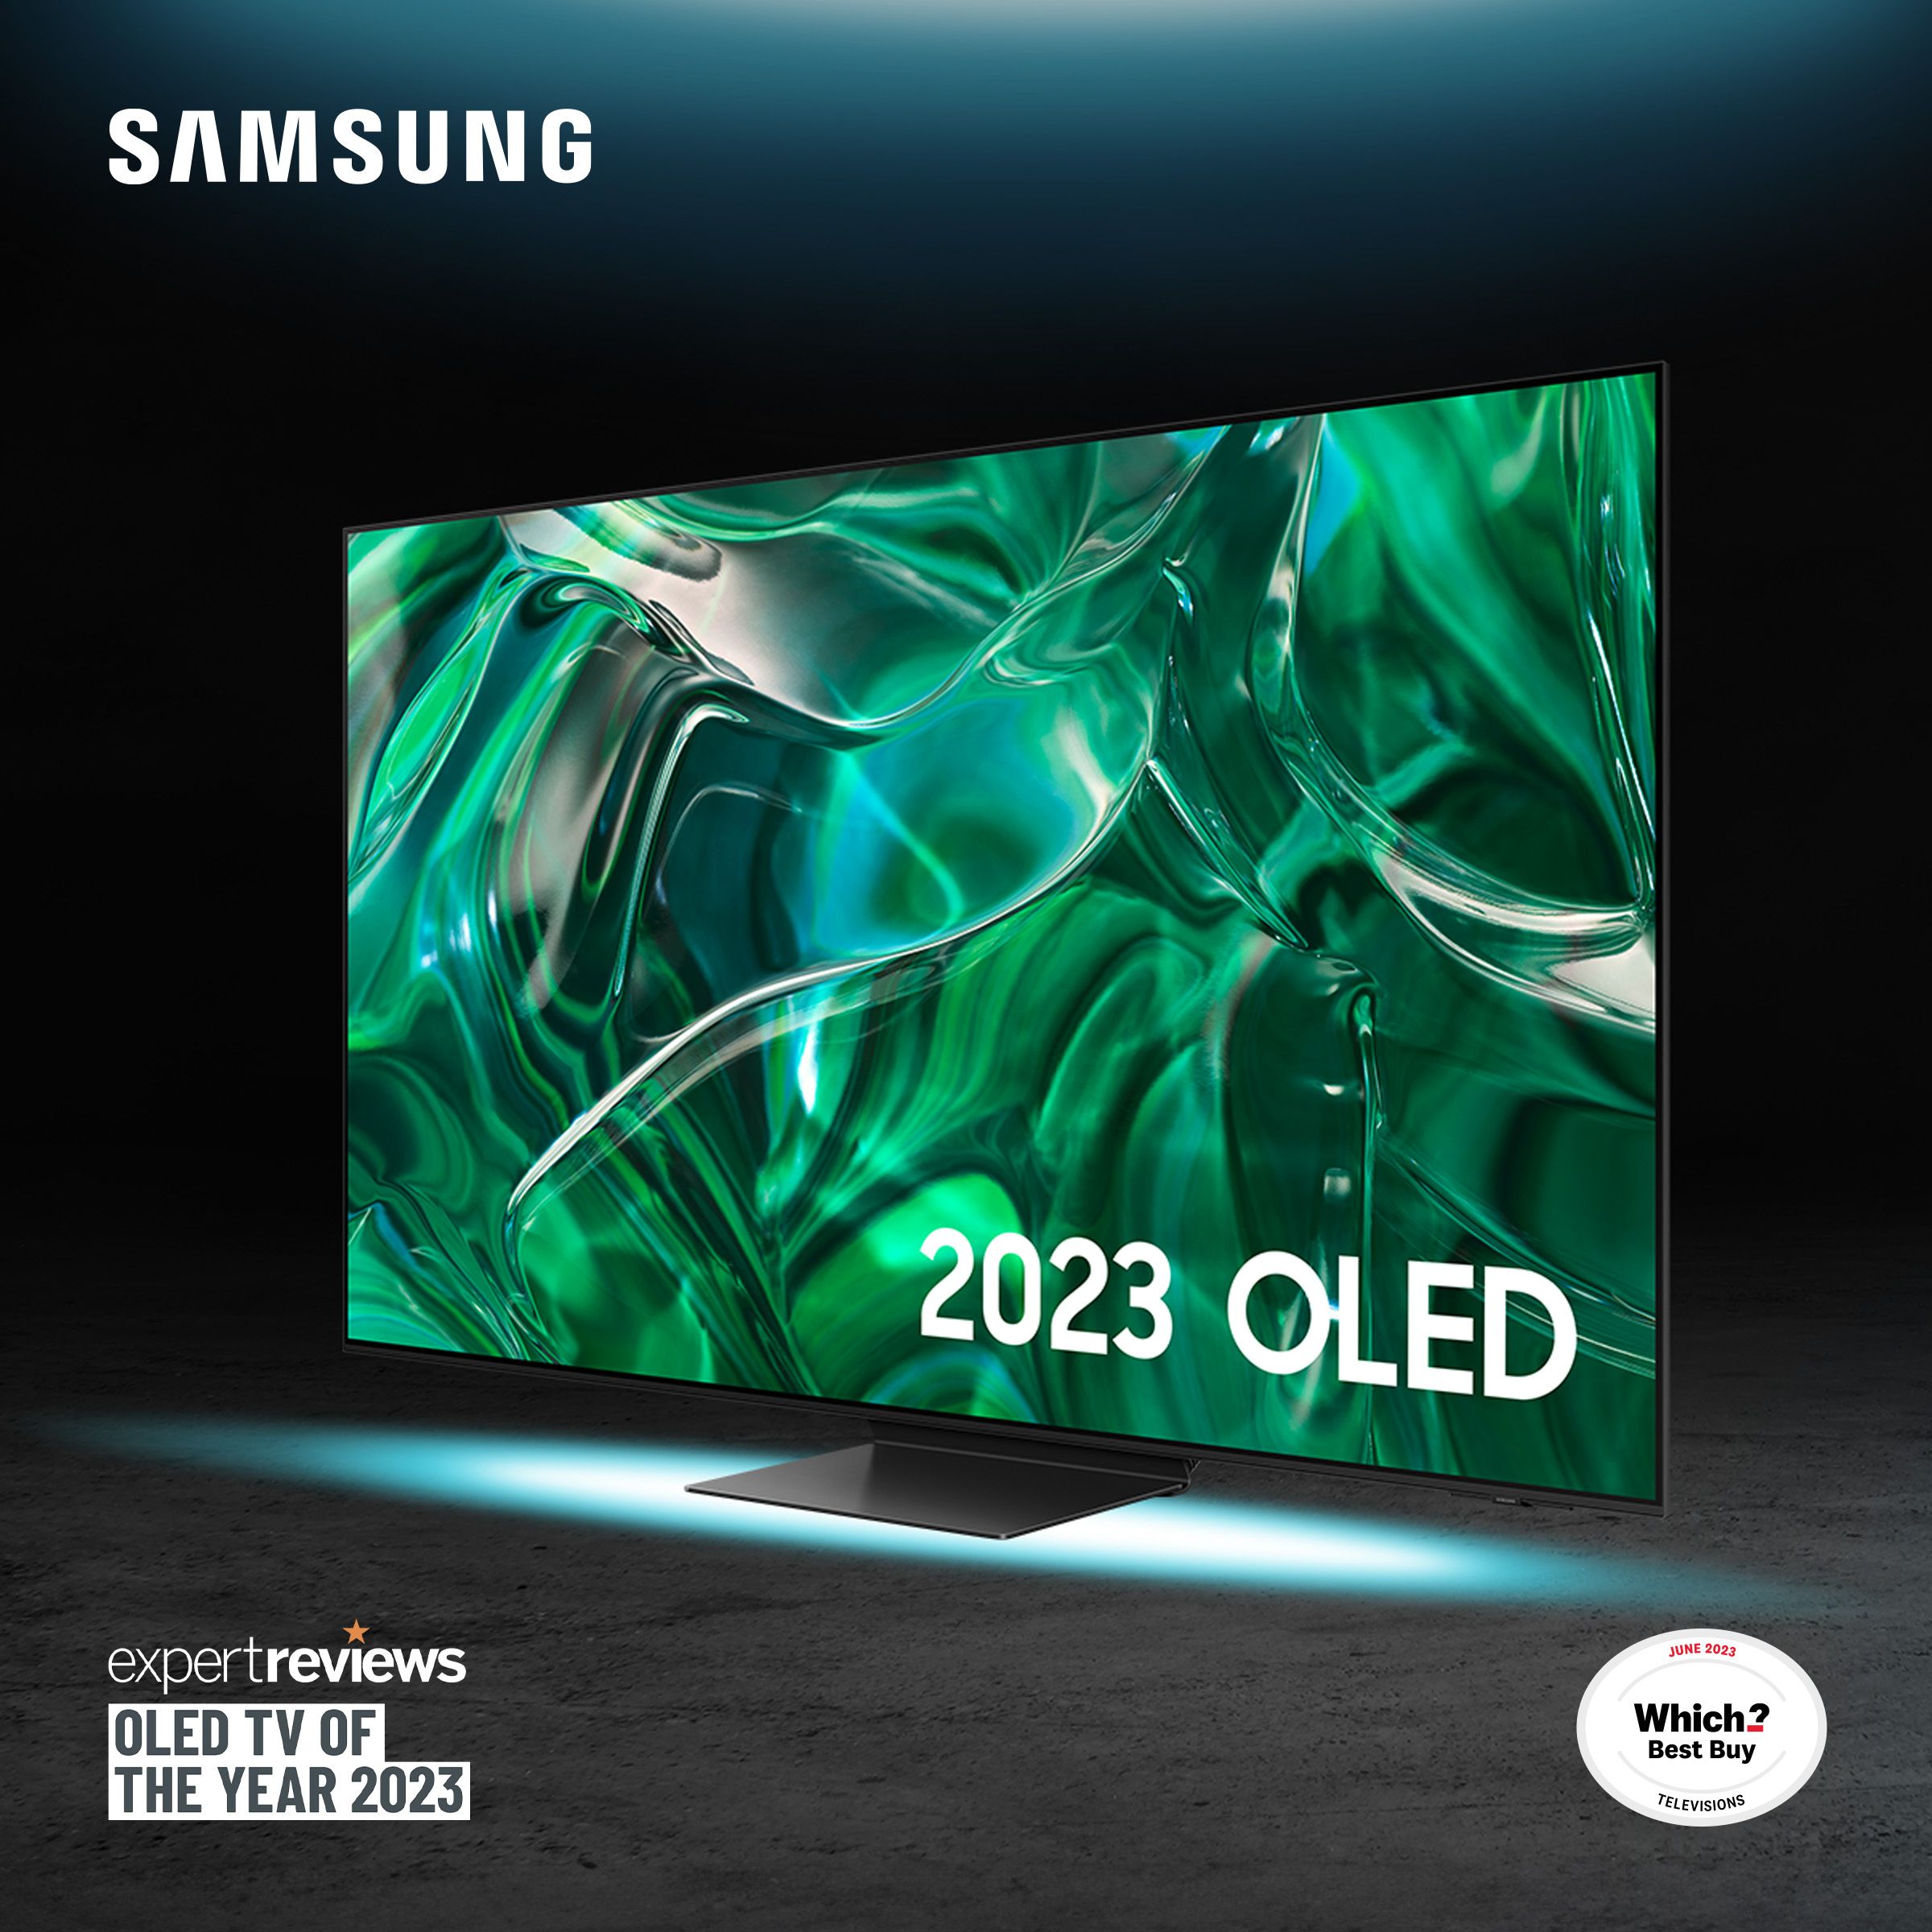 OLED TV of the year Discover Samsung's award winning OLED TVs